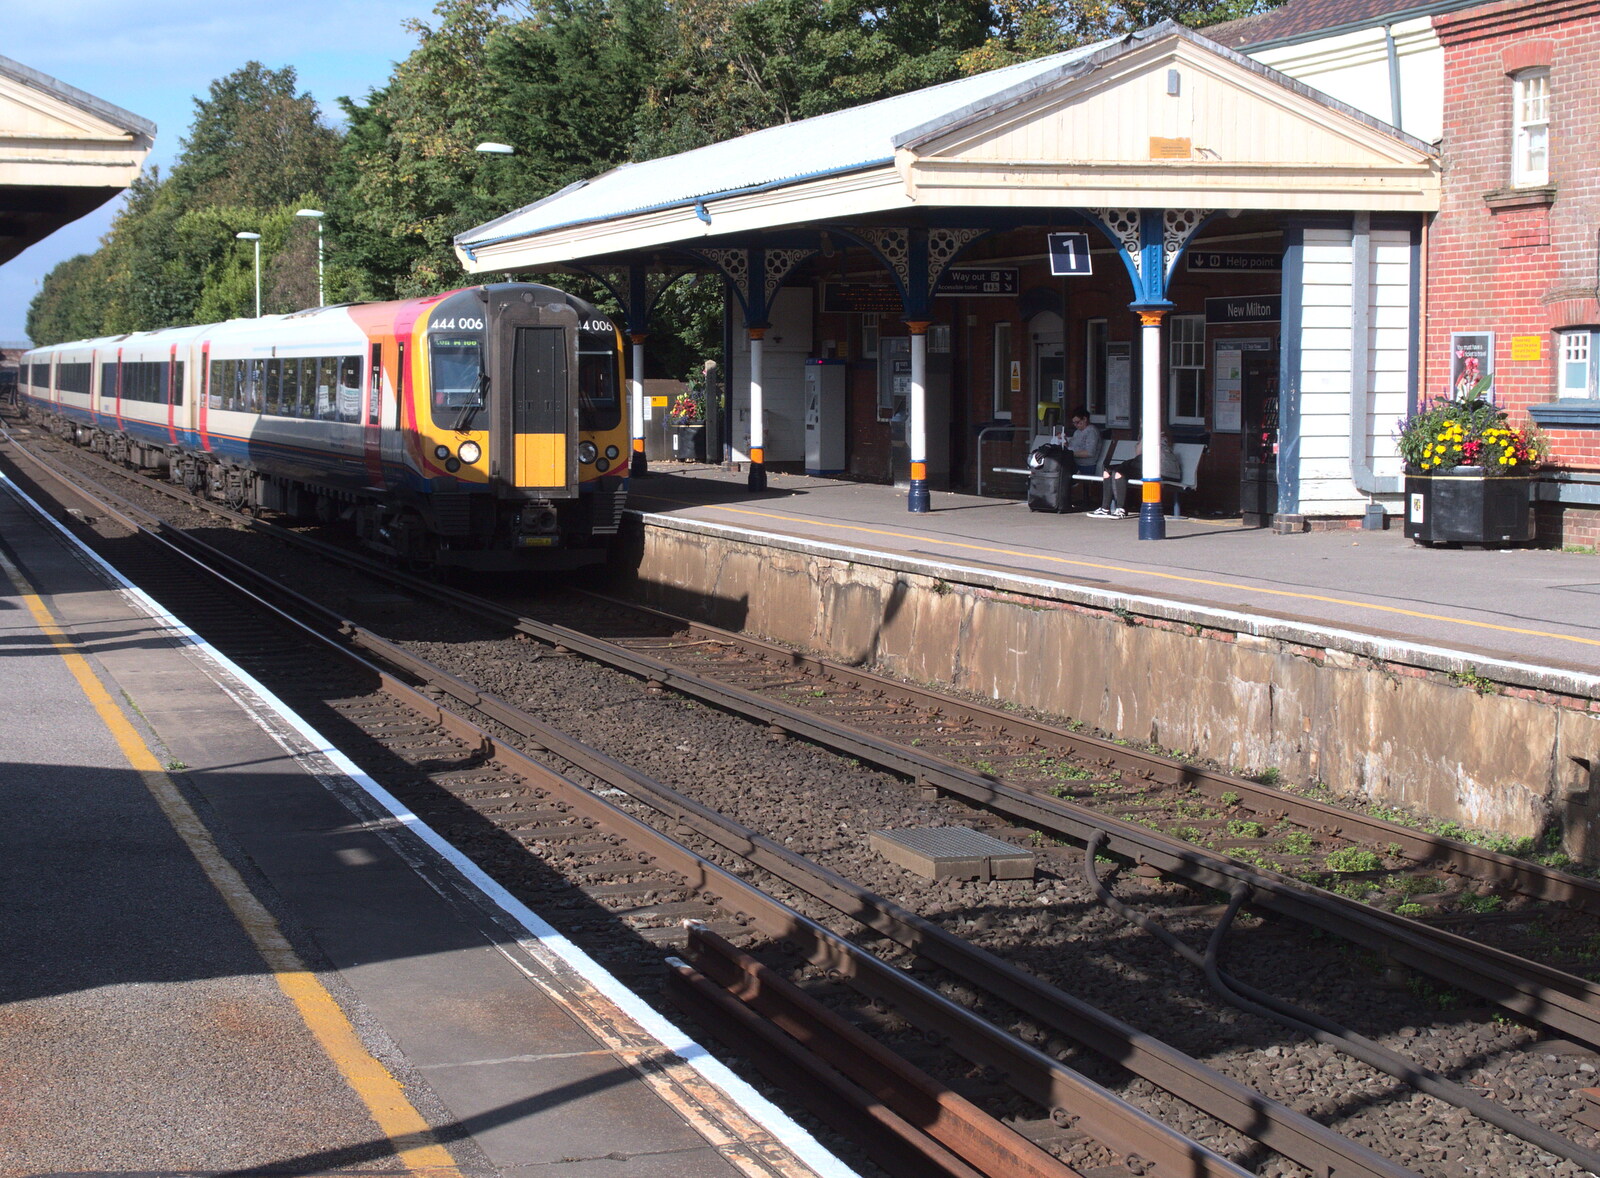 The trains are newer, but the station is the same from Grandmother's Wake, Winkton, Christchurch, Dorset - 18th September 2017